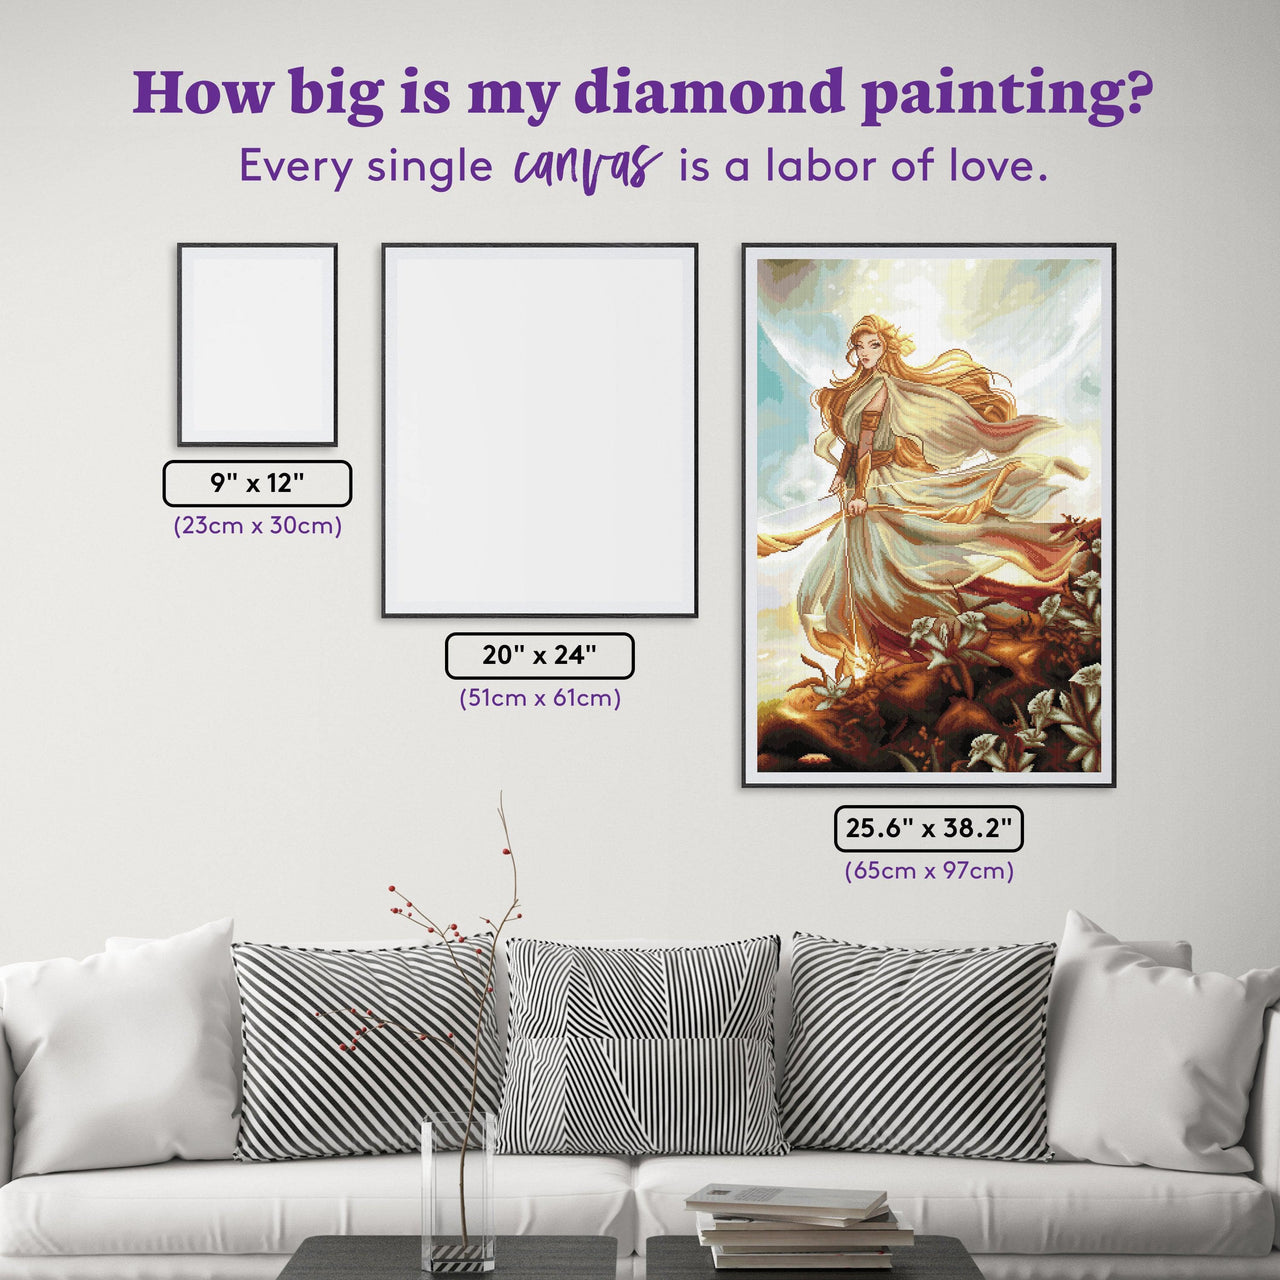 Diamond Painting Artemis 25.6" x 38.2" (65cm x 97cm) / Square with 55 Colors including 3 ABs and 1 Fairy Dust Diamonds / 101,529